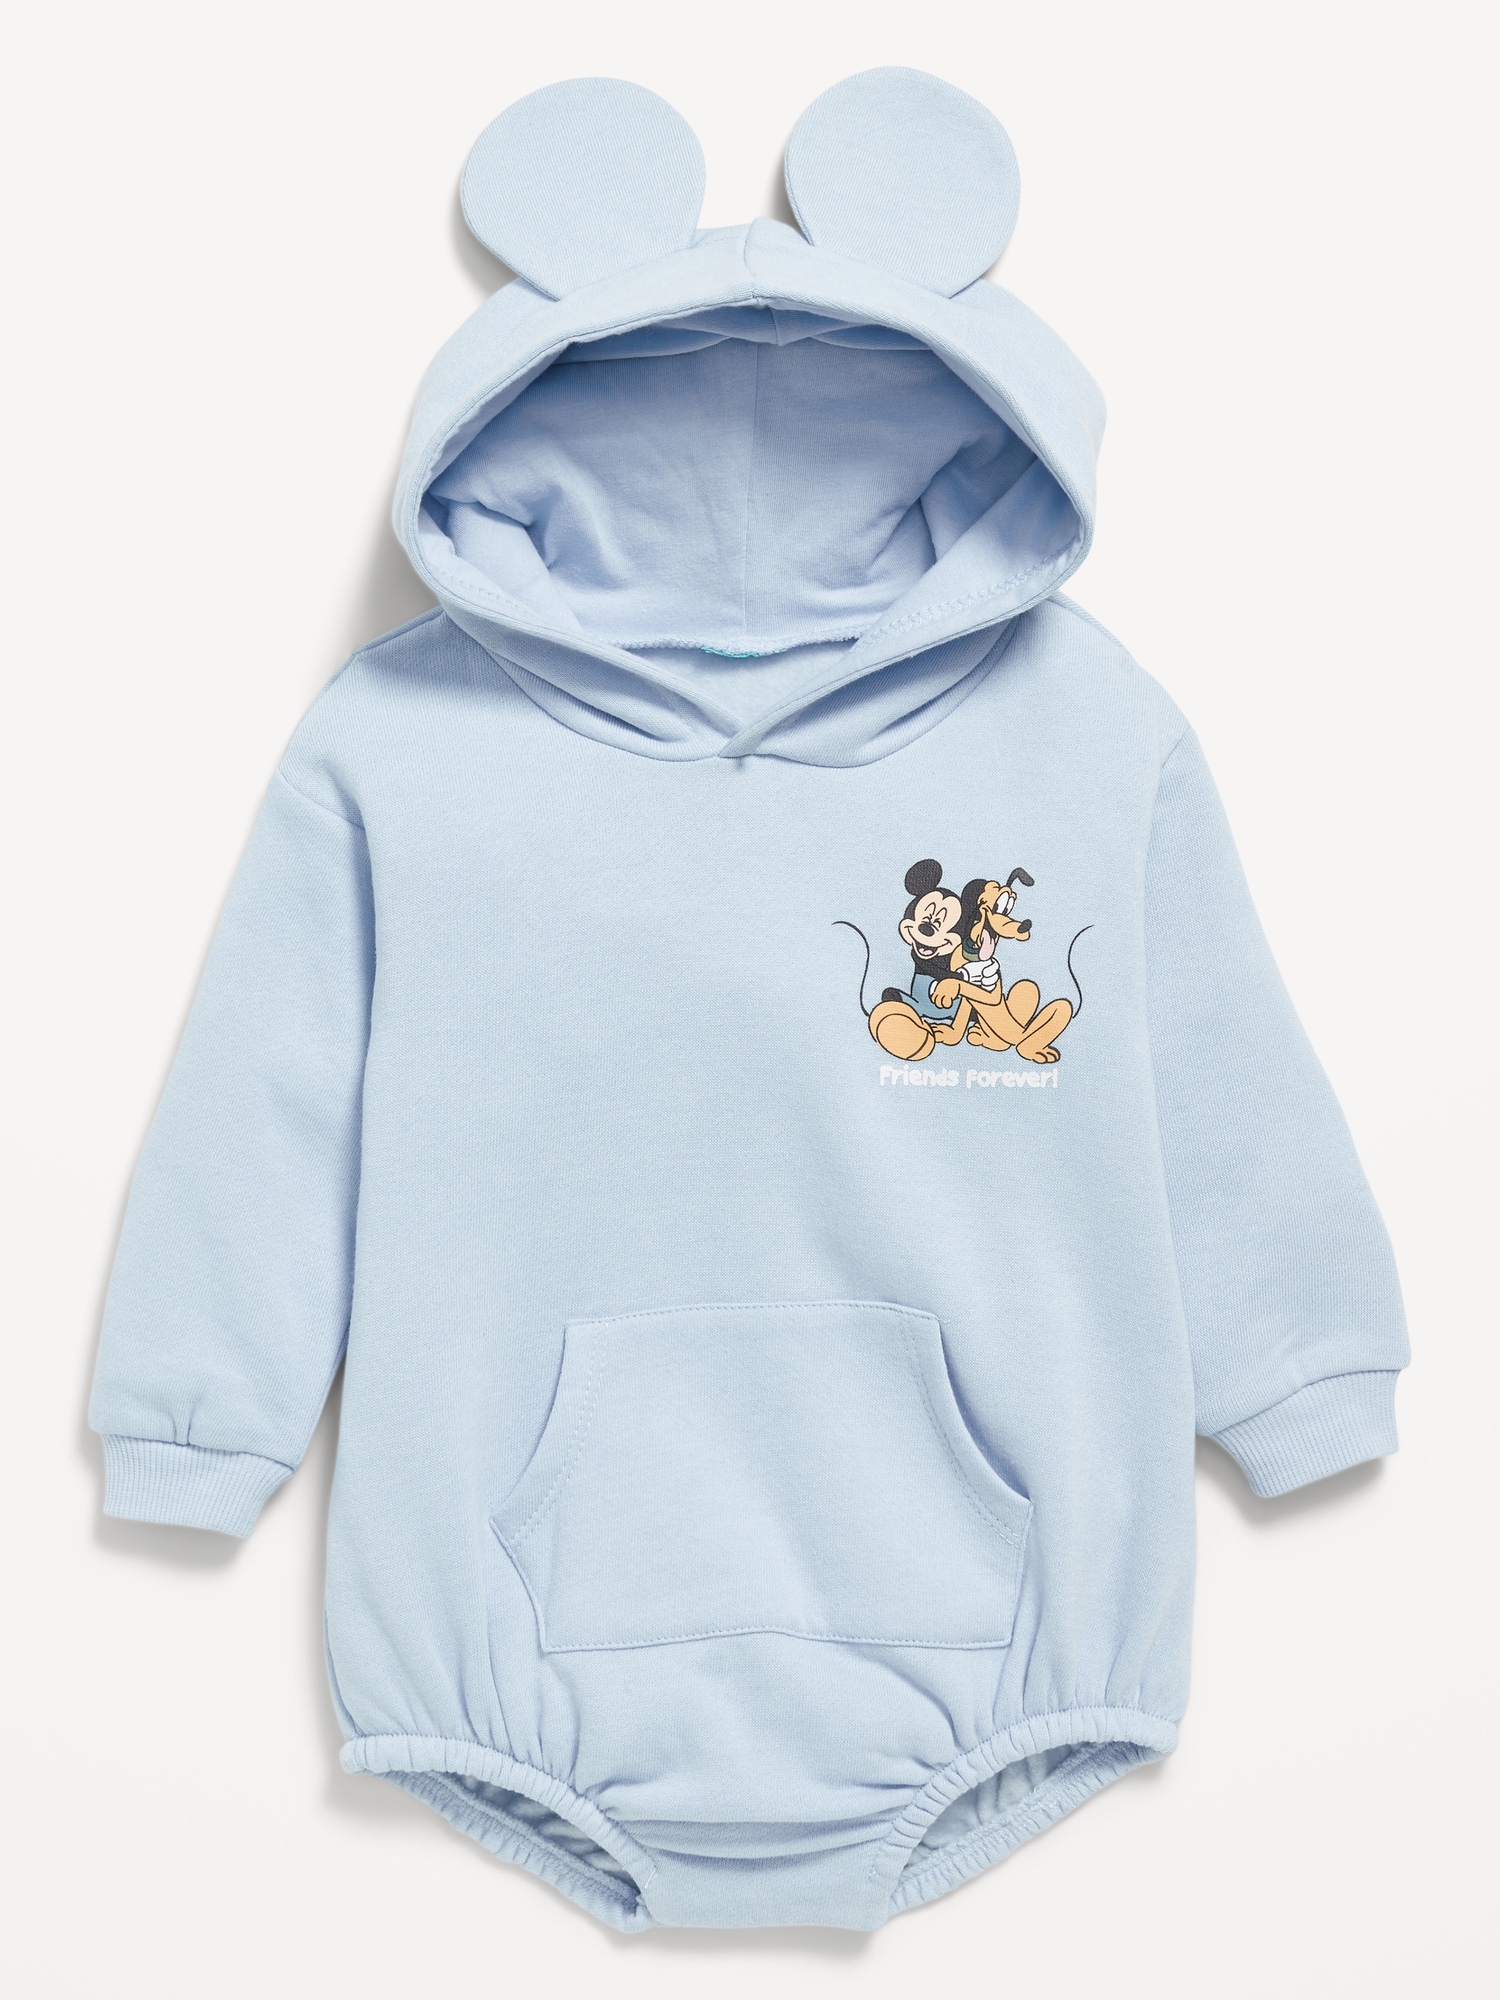 Disney© Mickey Mouse Hooded One-Piece Romper for Baby